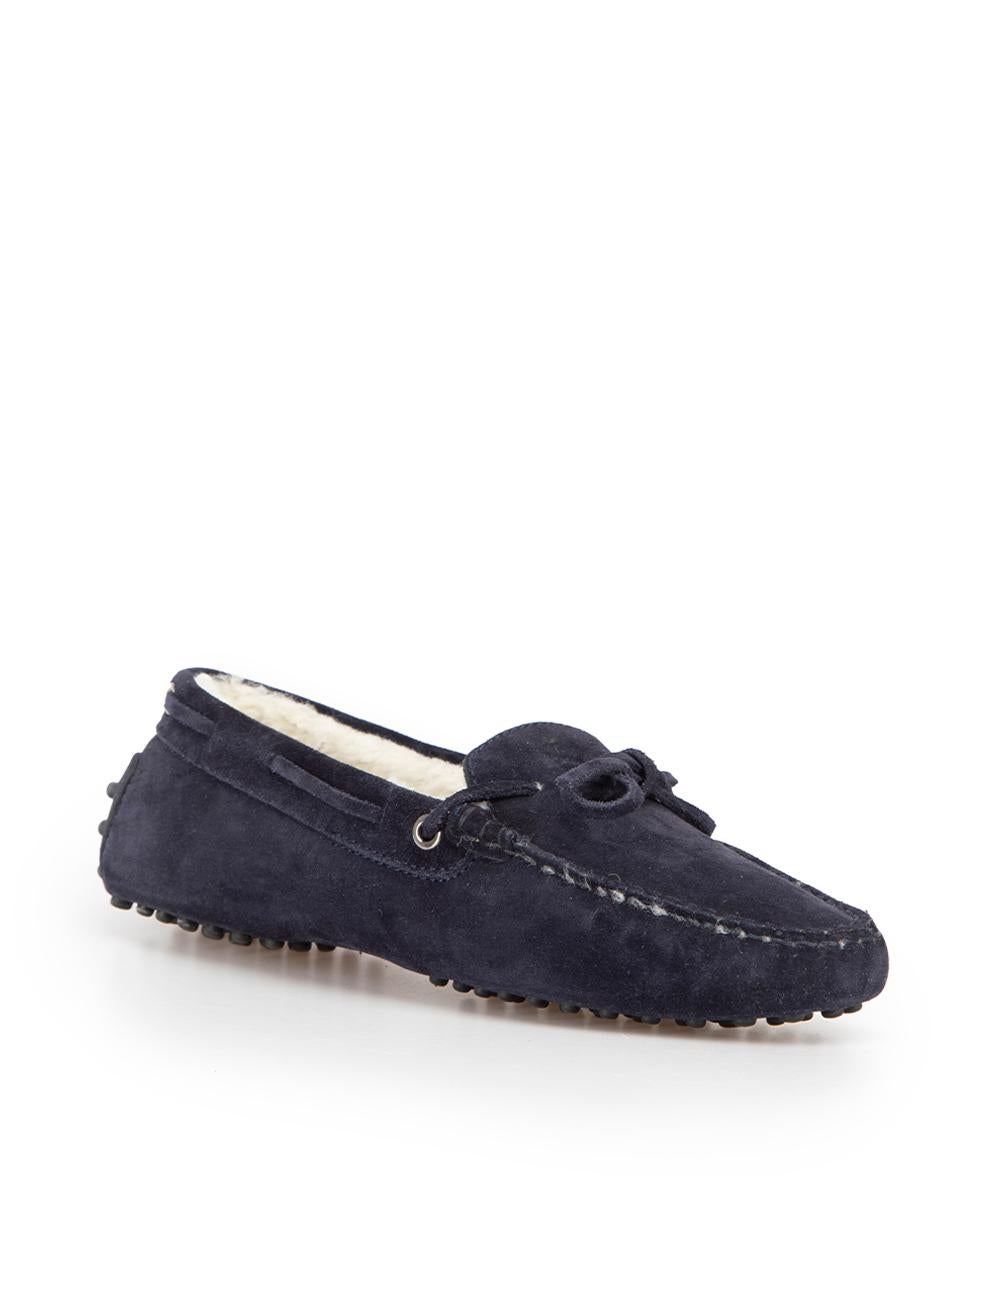 CONDITION is Very good. Minimal wear to shoes is evident. Minimal wear to suede exterior on this used Tod's designer resale item. This item includes the original brush and shoebox.
 
 Details
  Navy
 Suede
 Slip on loafers
 Round toe
 Falt heel
